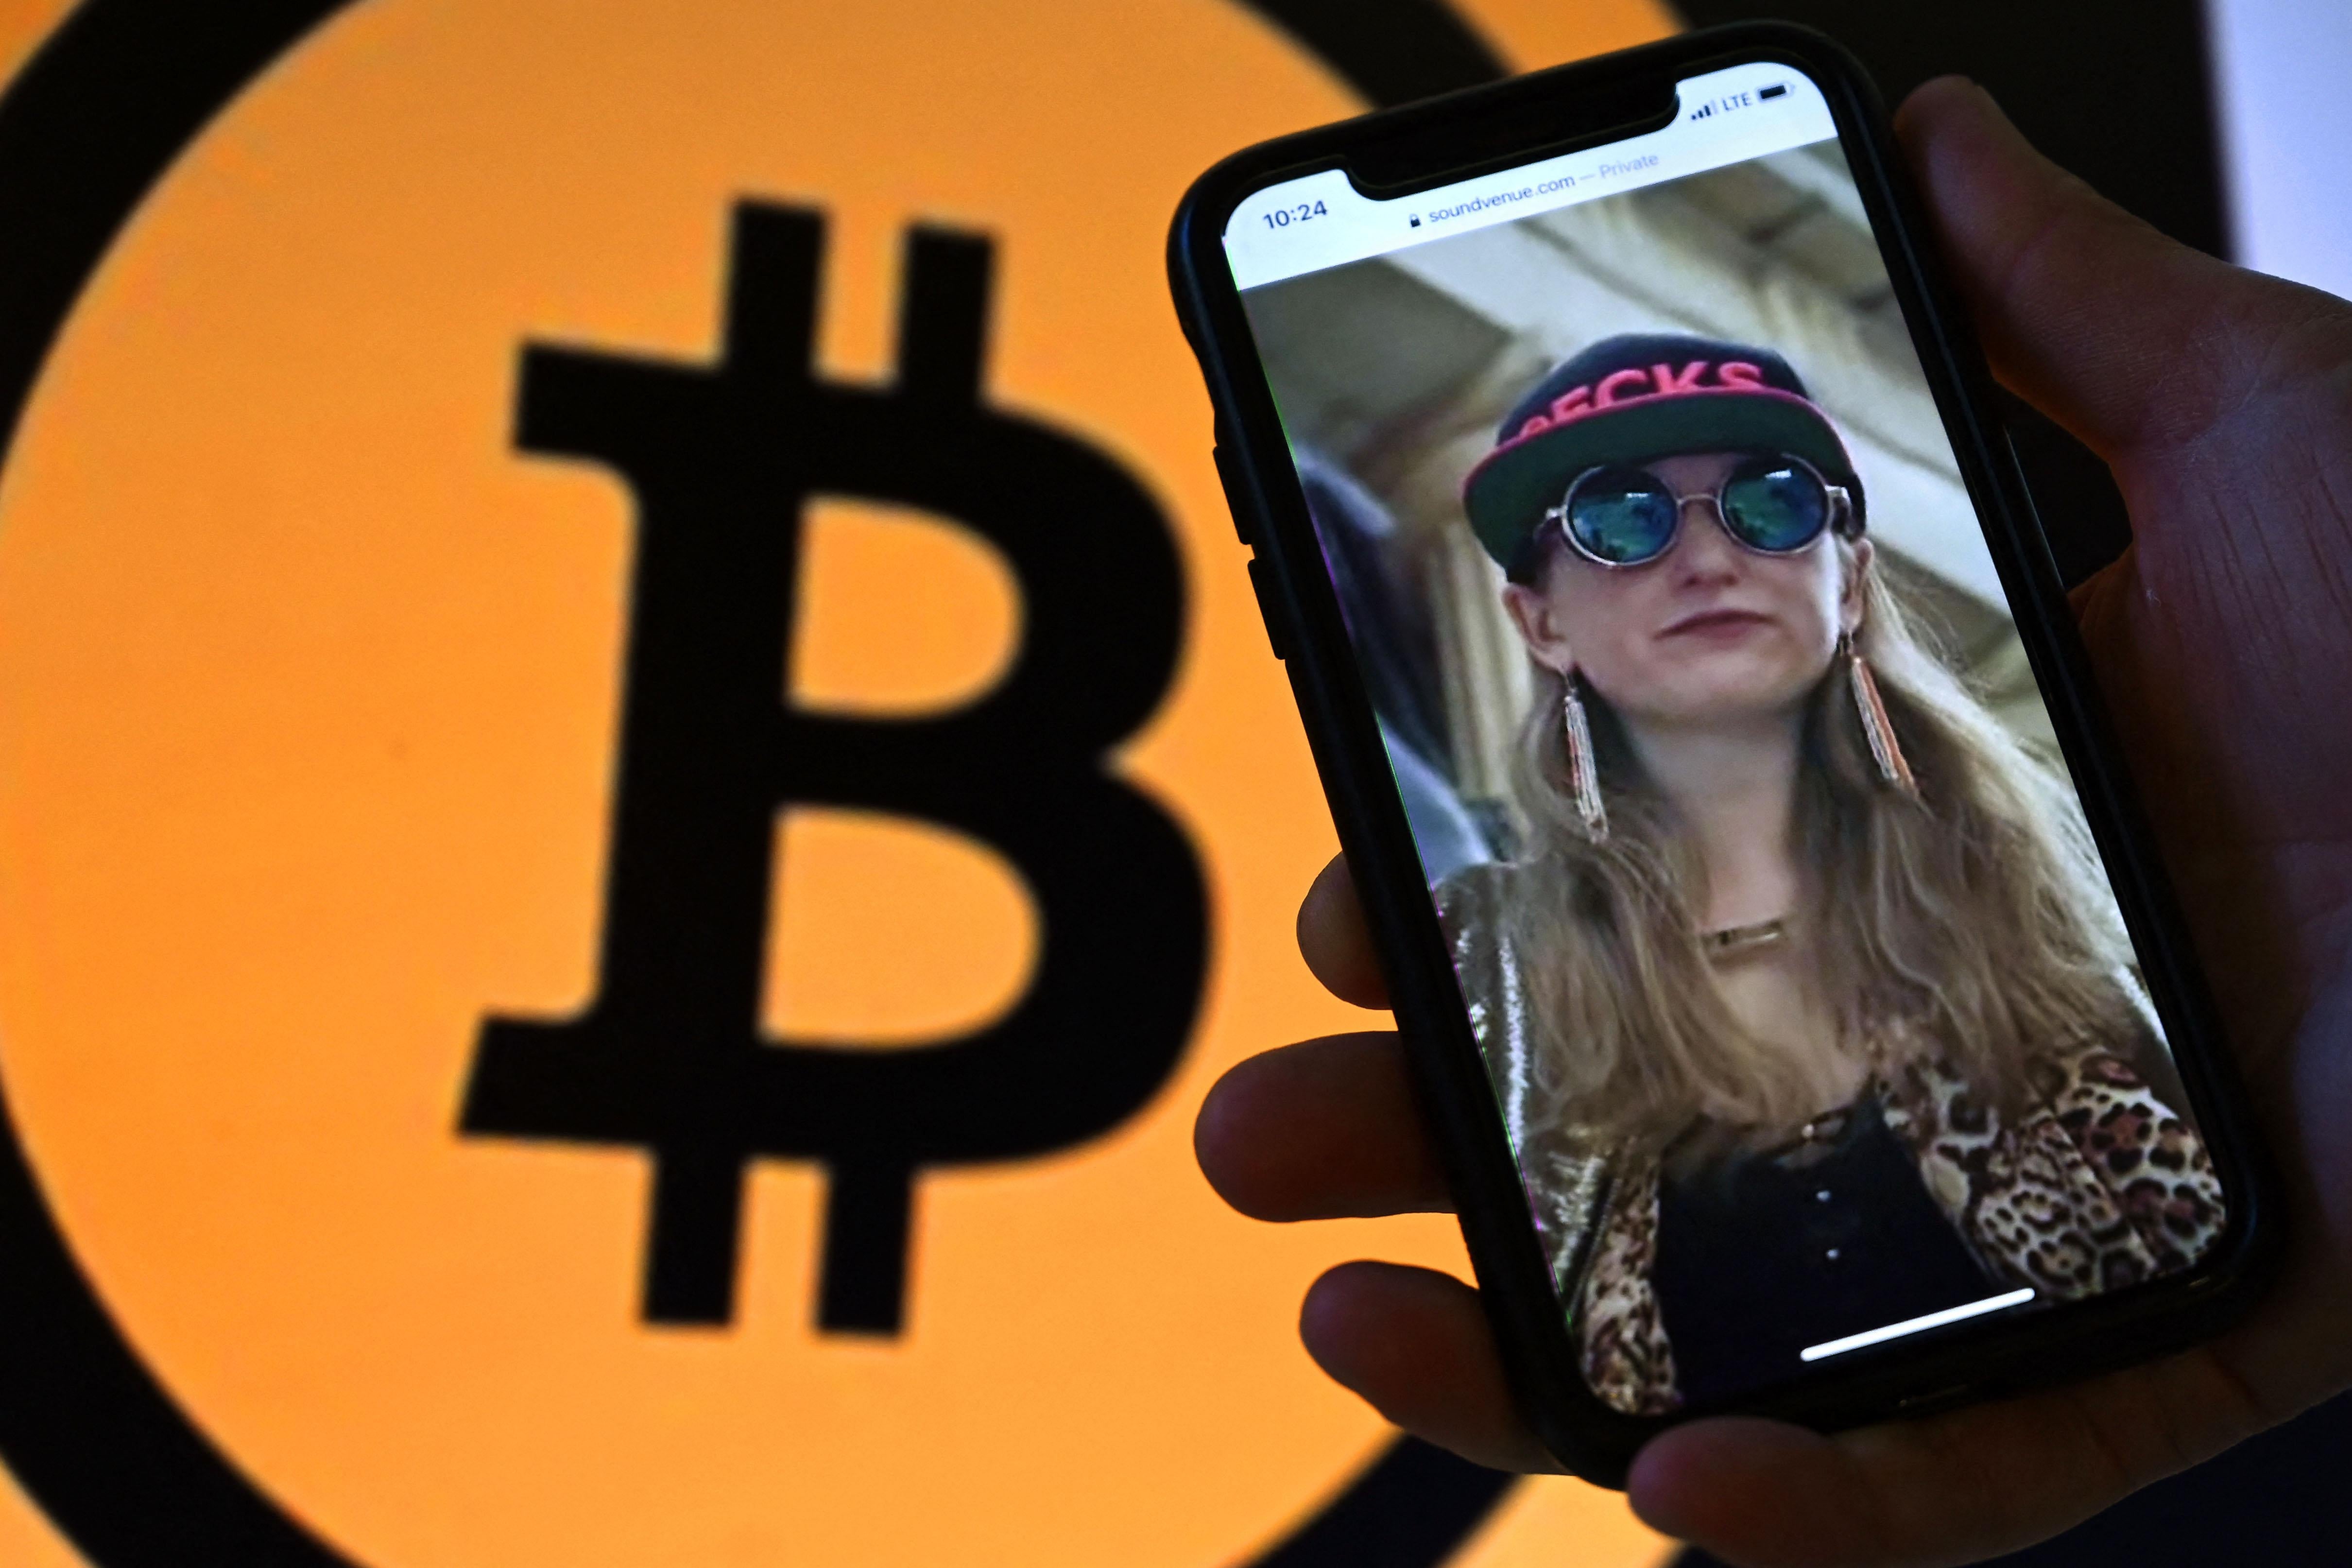 This illustration photo shows Heather Morgan, also known as “Razzlekhan,” on a phone in front of the Bitcoin logo displayed on a screen.